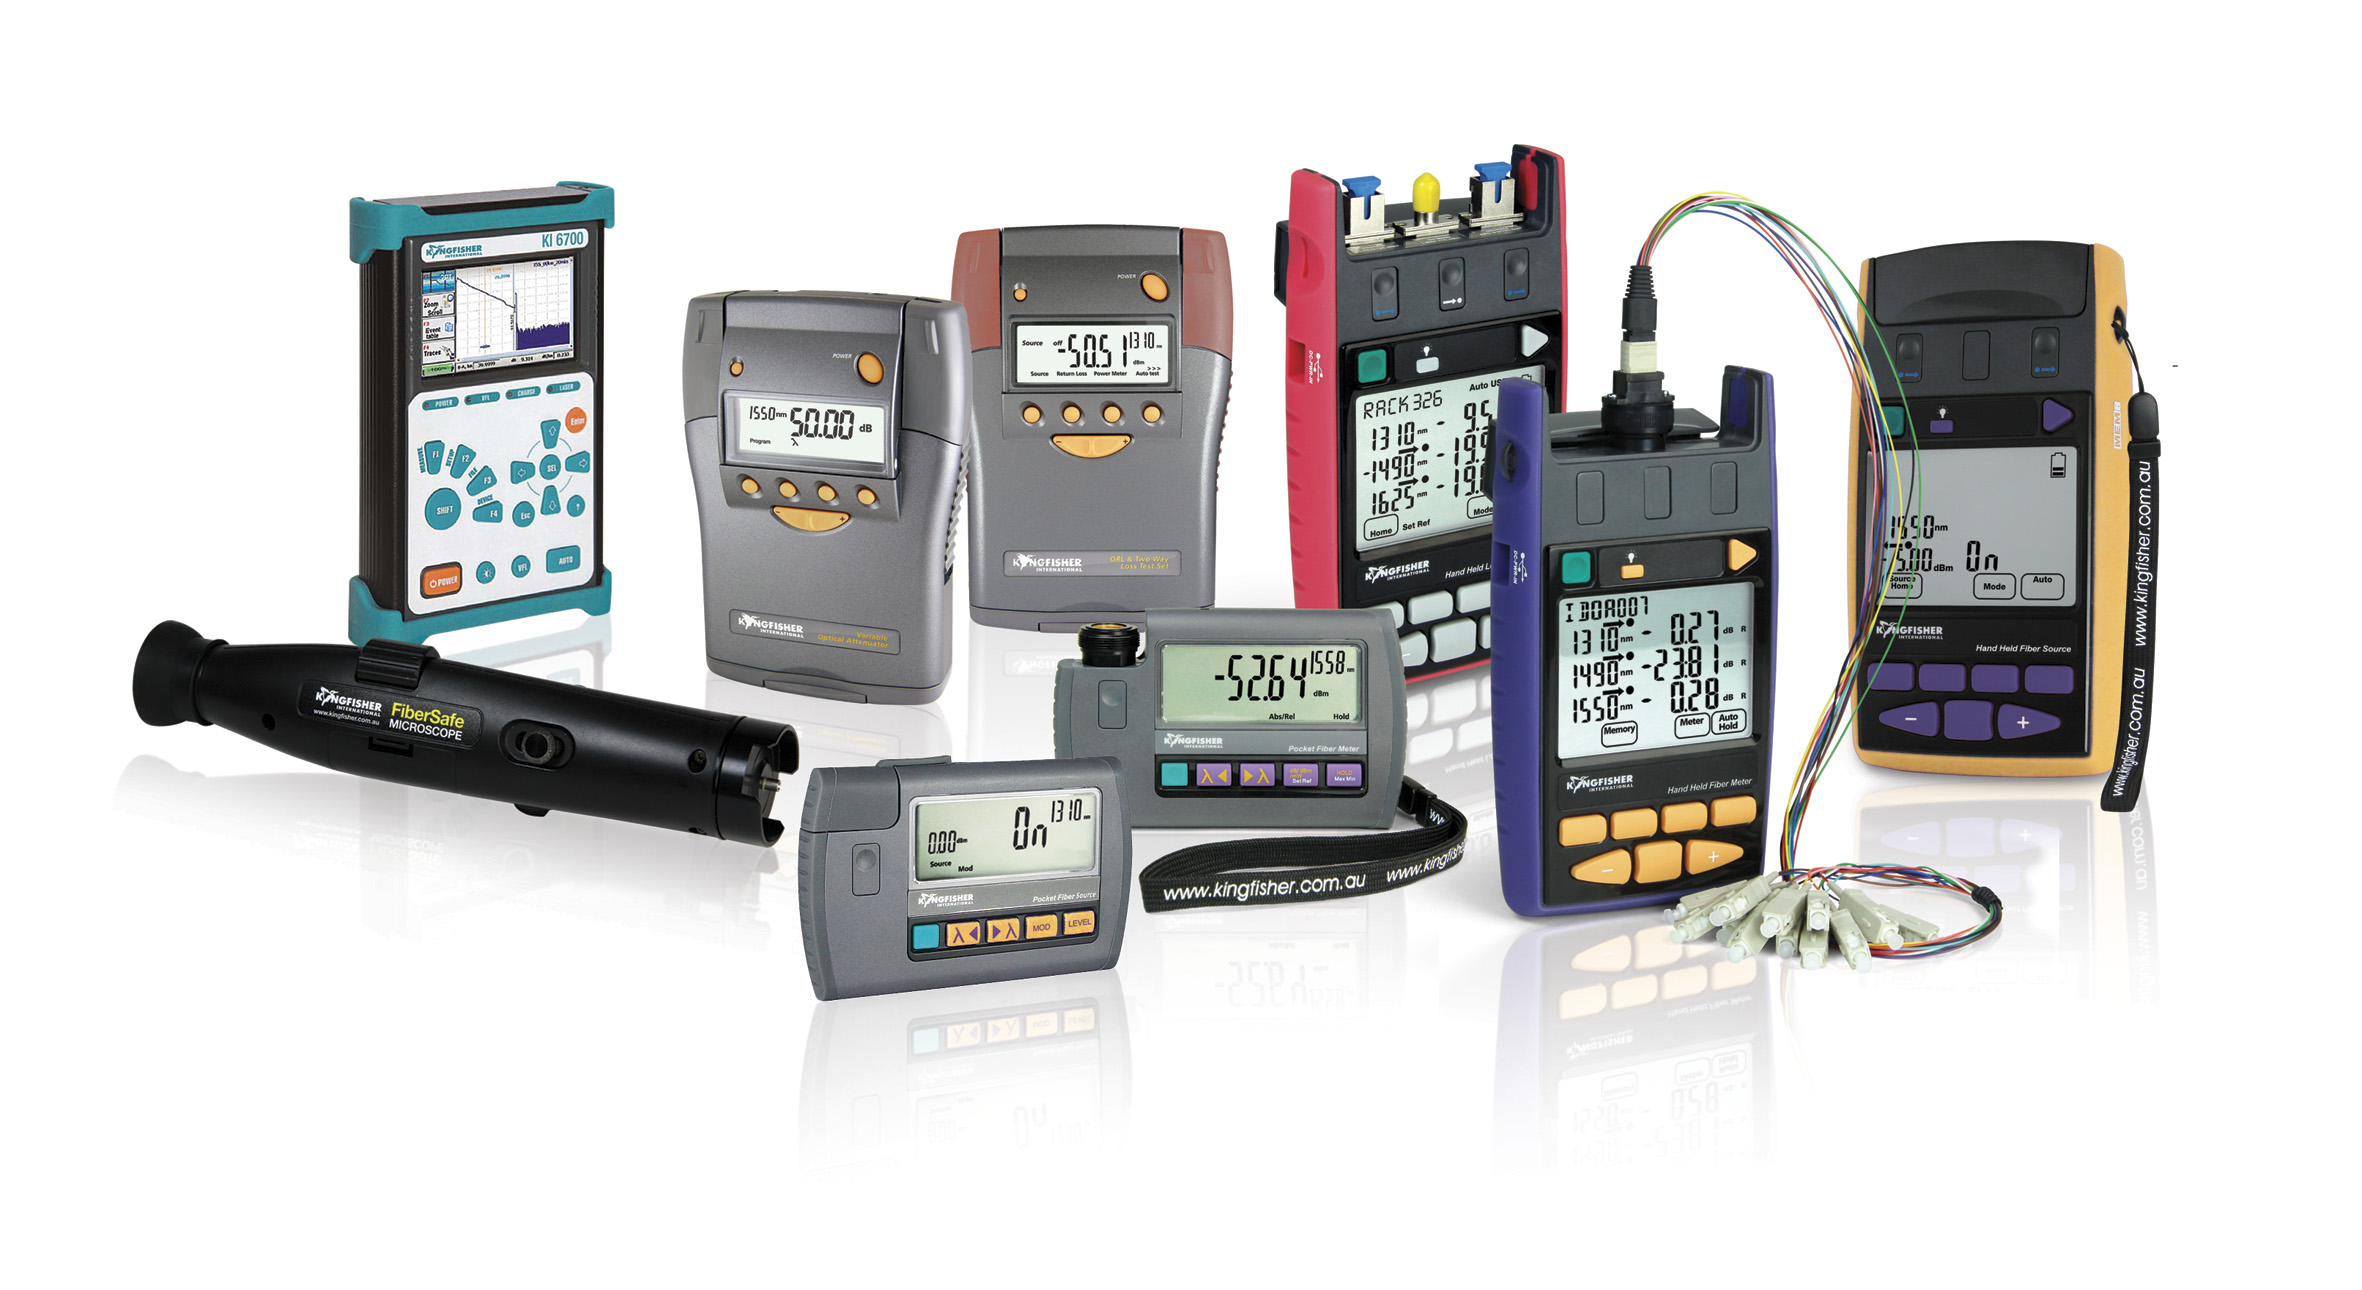 Handheld Fibre Optic Test Equipment and Kits for all fiber and cable types